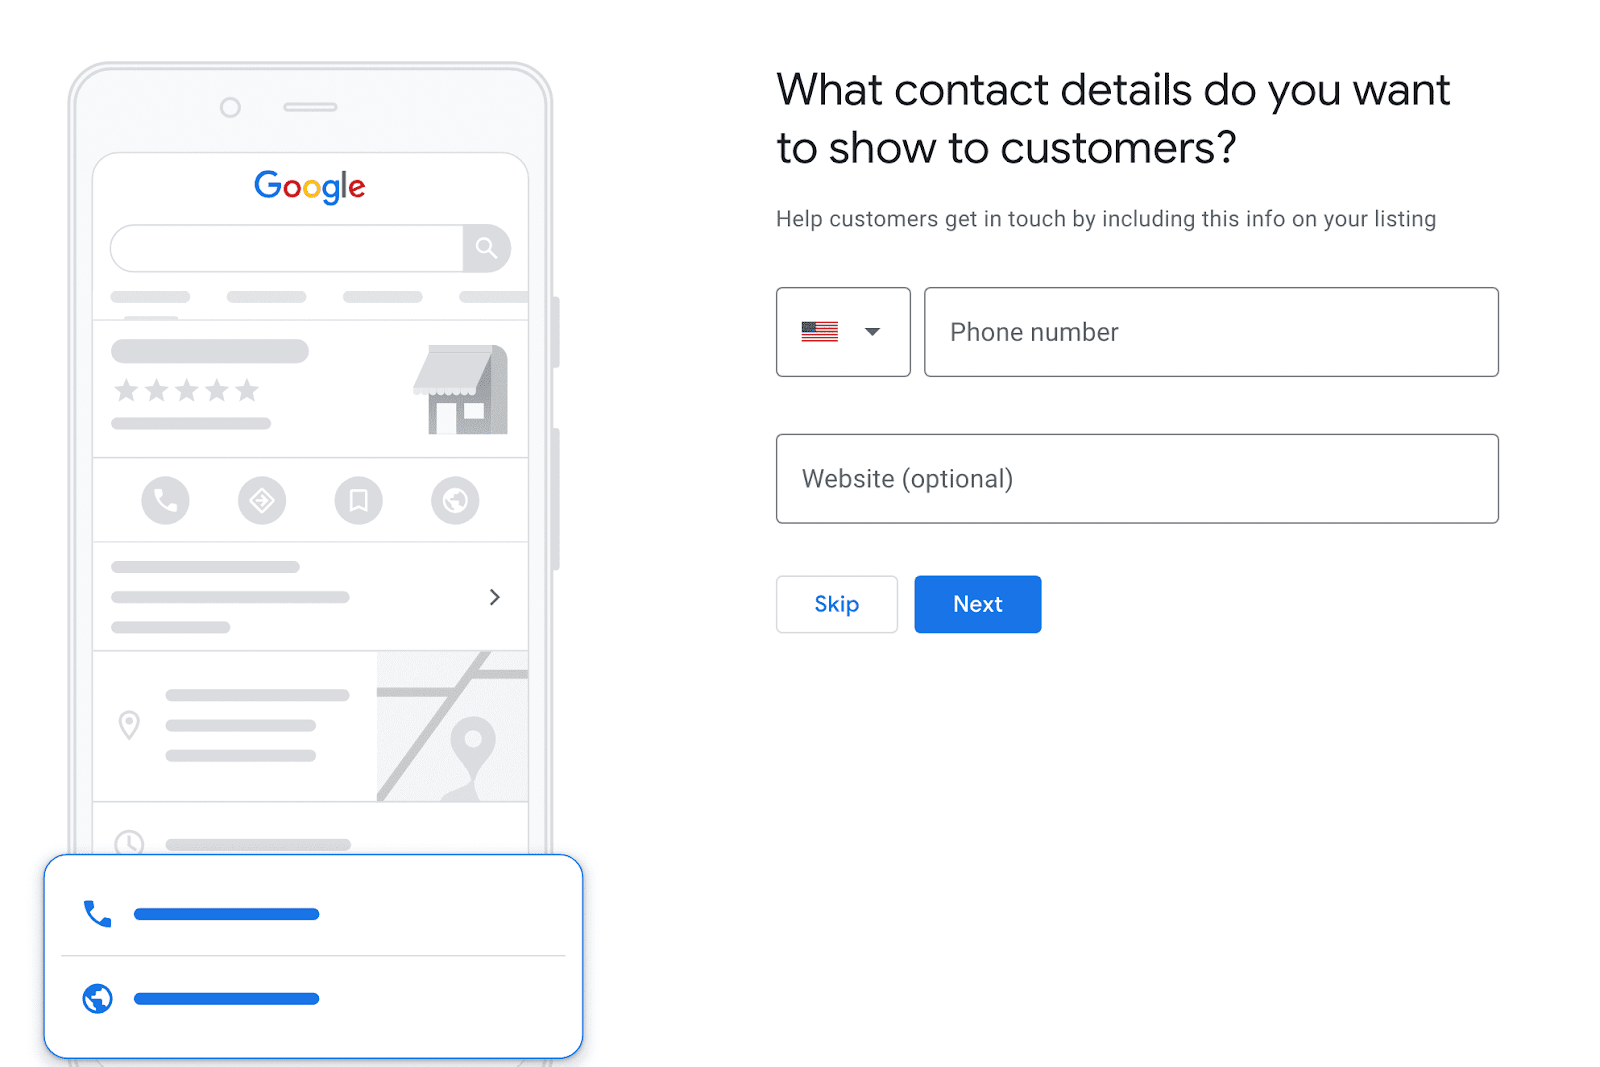 Contact details window in GBP settings